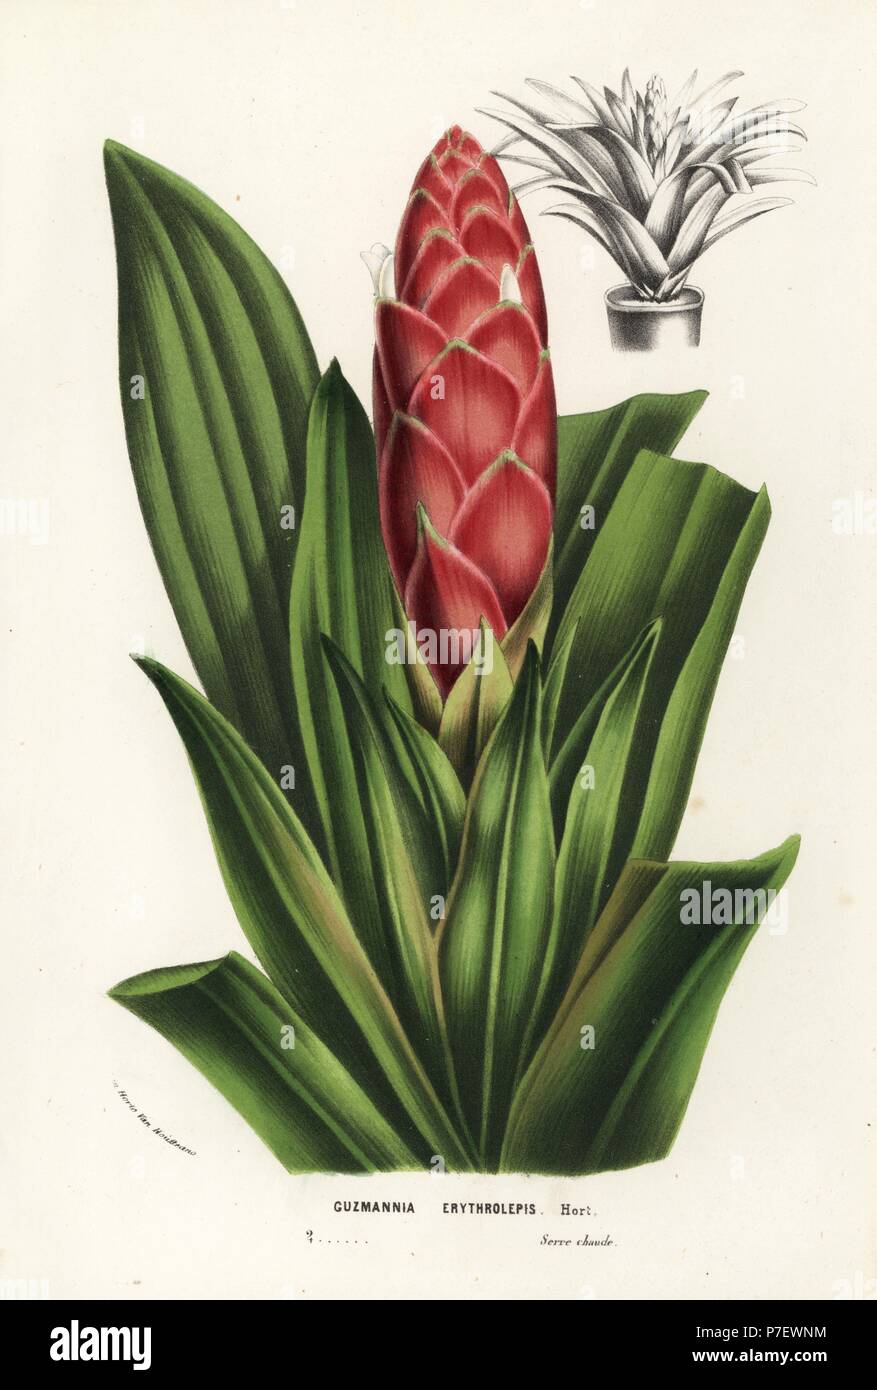 Tufted airplant, Guzmania erythrolepis (Guzmannia erythrolepis). Handcoloured lithograph from Louis van Houtte and Charles Lemaire's Flowers of the Gardens and Hothouses of Europe, Flore des Serres et des Jardins de l'Europe, Ghent, Belgium, 1856. Stock Photo